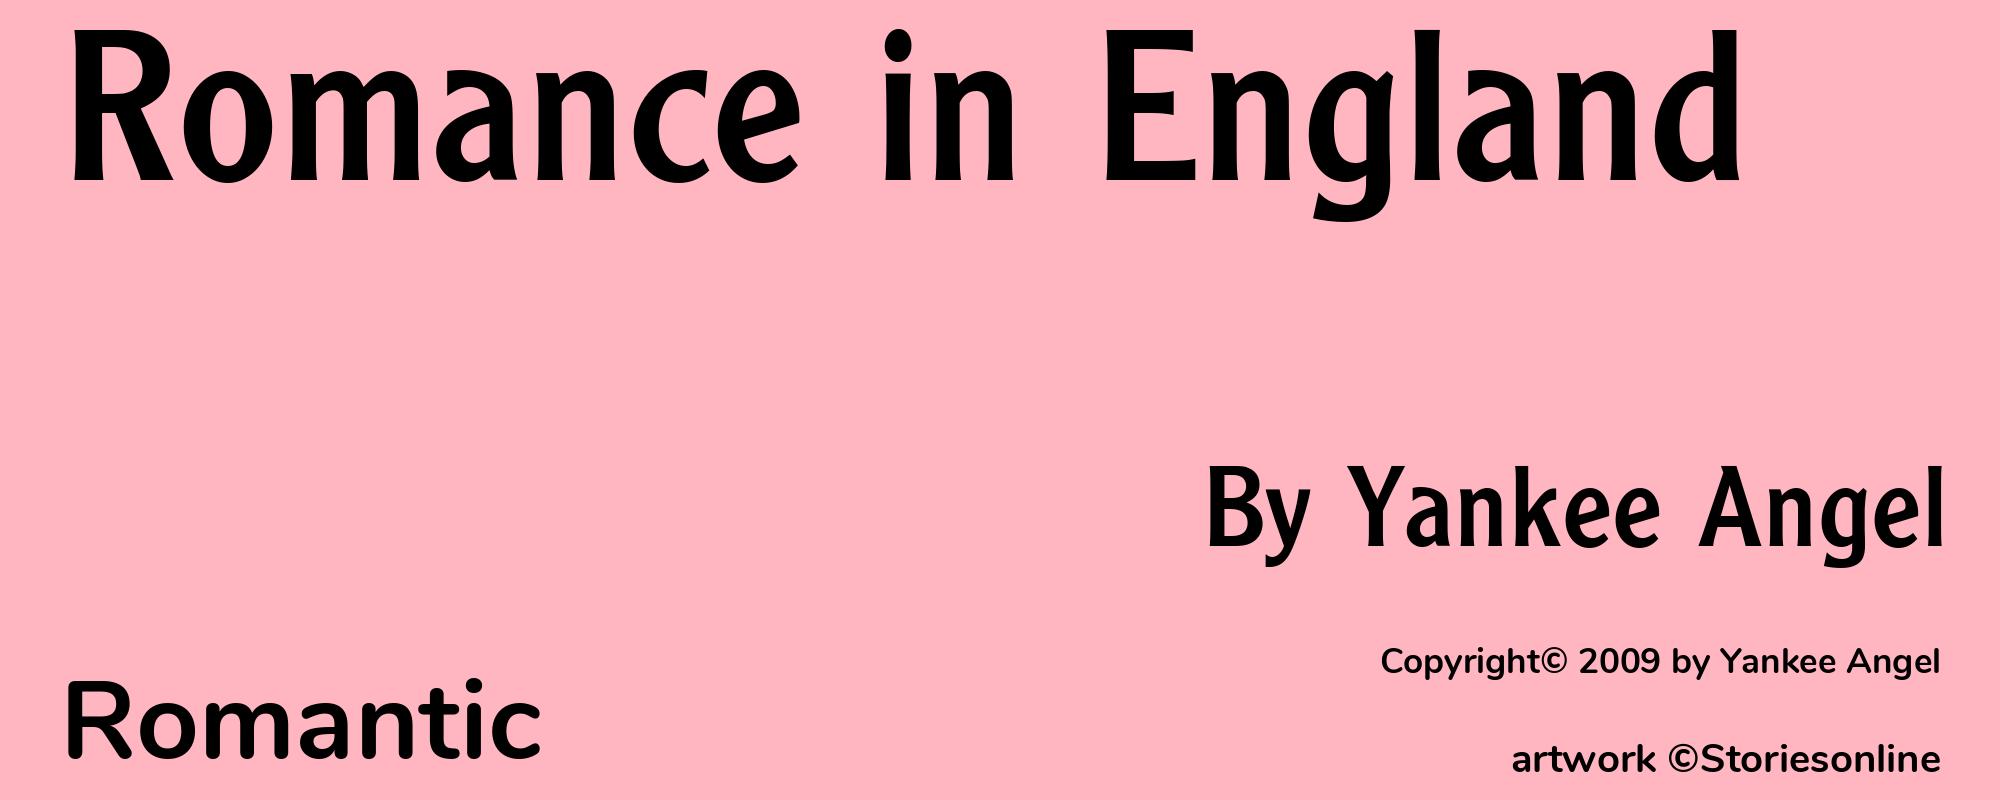 Romance in England - Cover